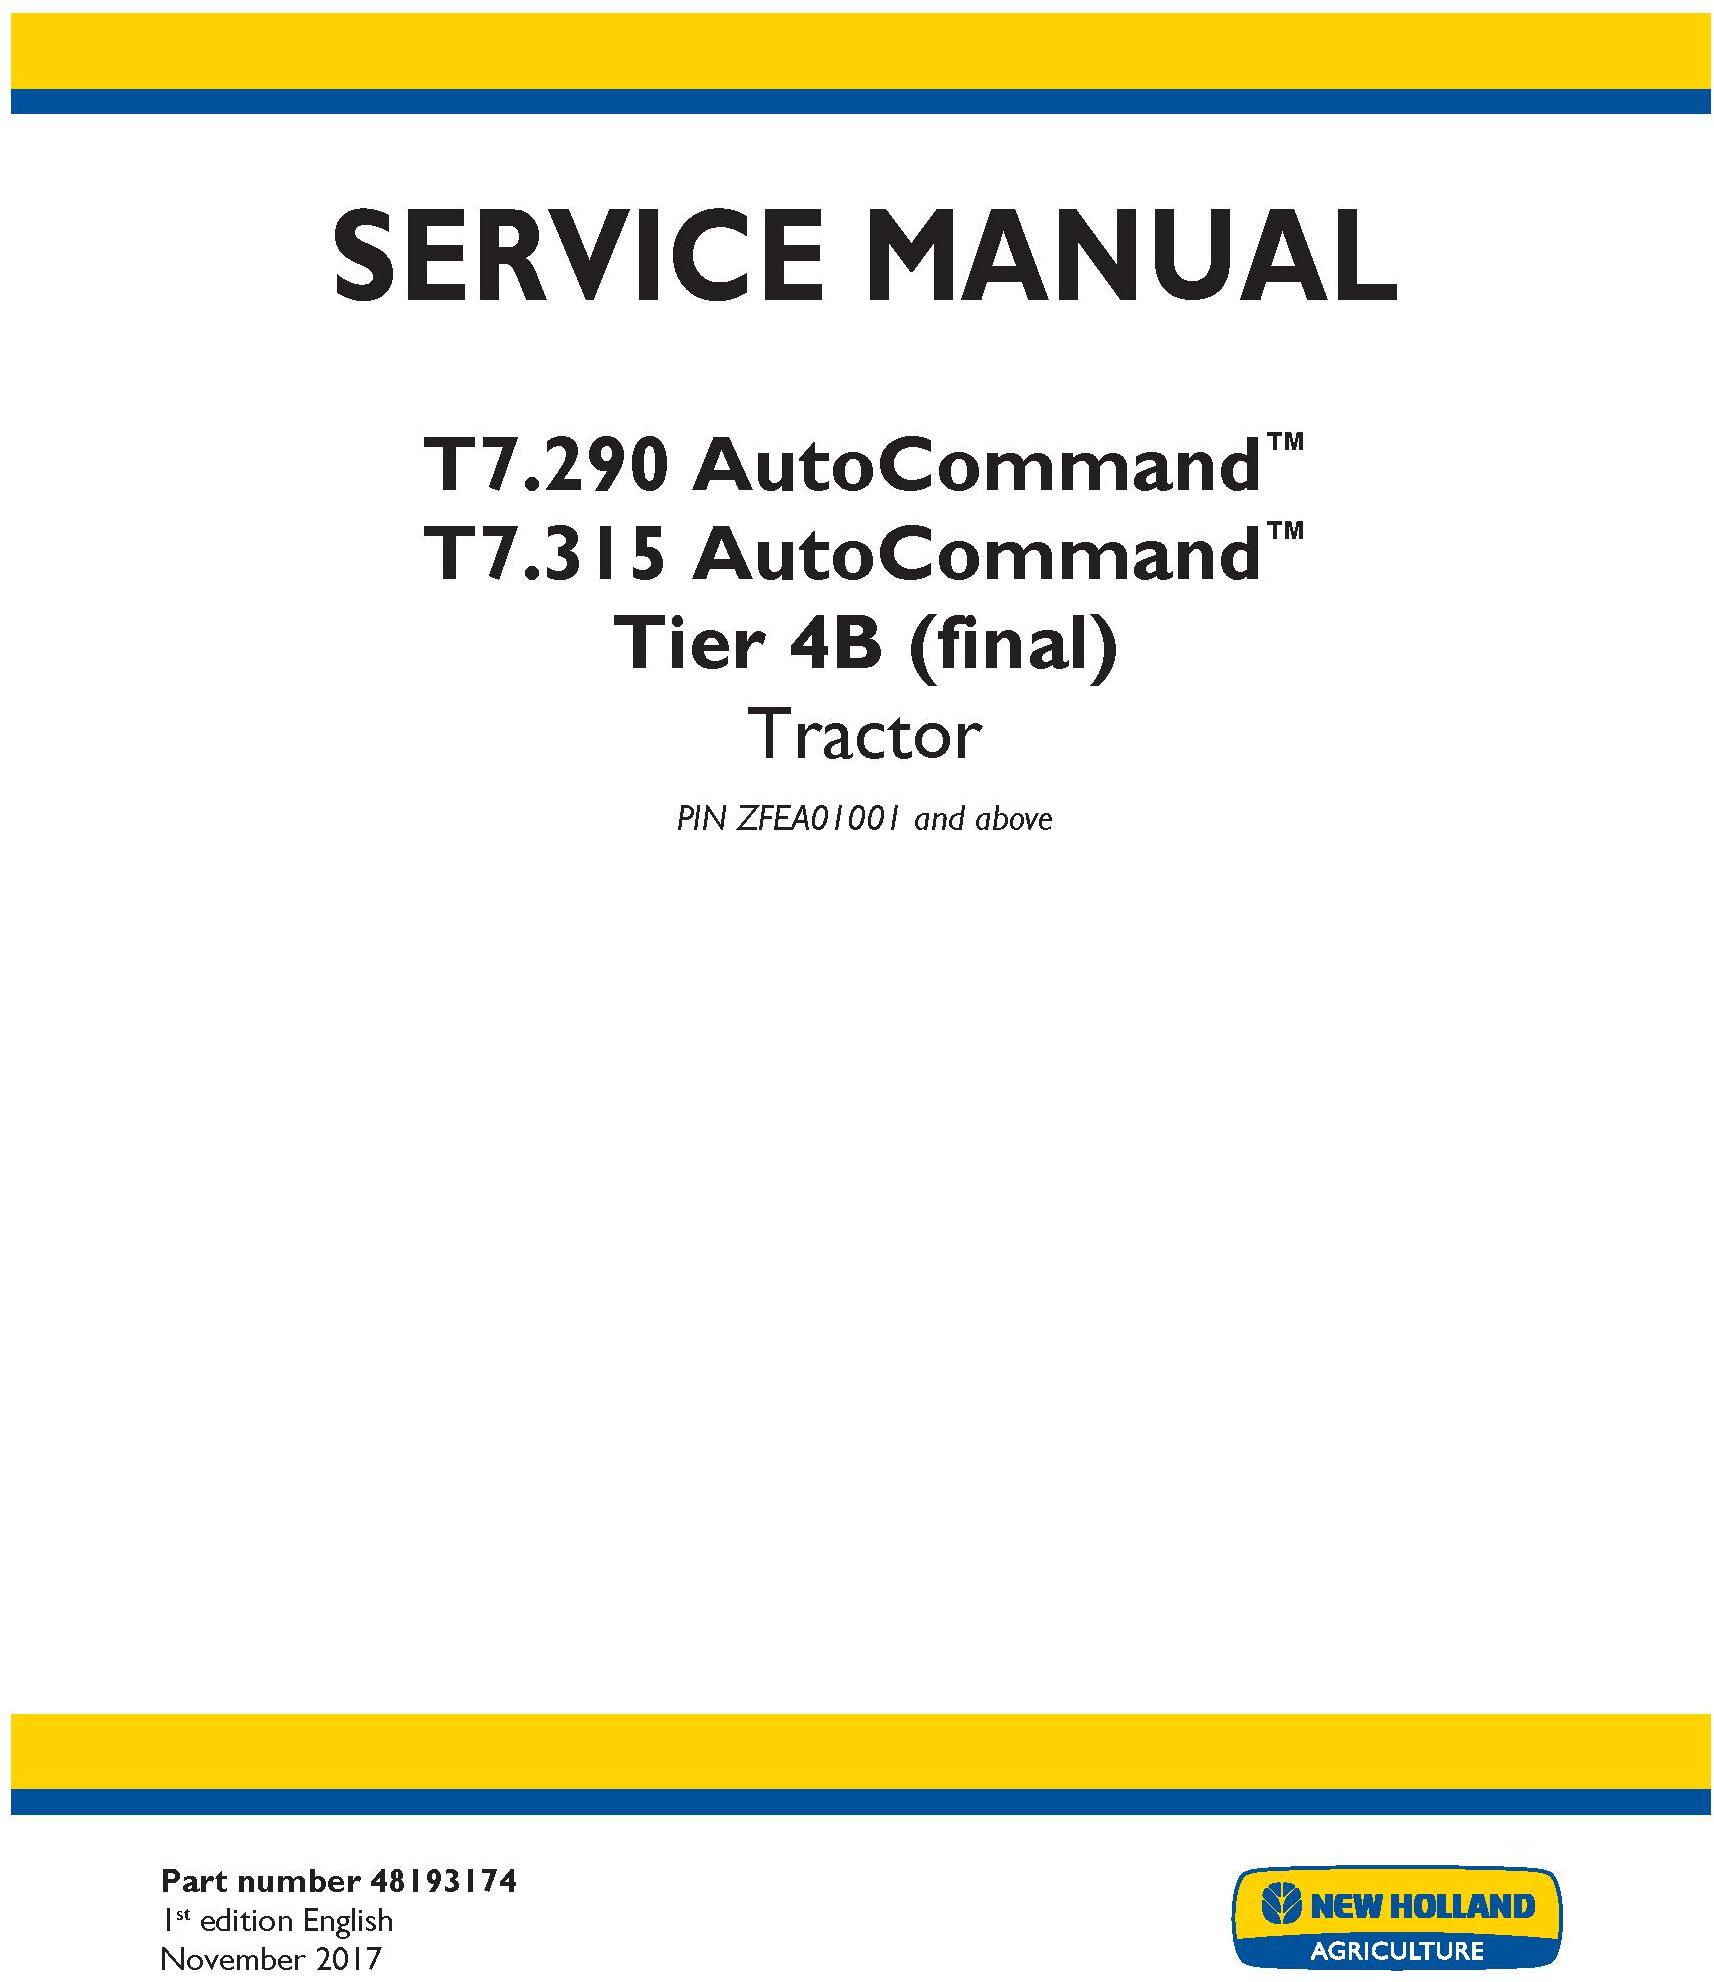 New Holland T7.290 AutoCommand, T7.315 AutoCommand Tier 4B final Tractor Service Manual (USA) - 19503